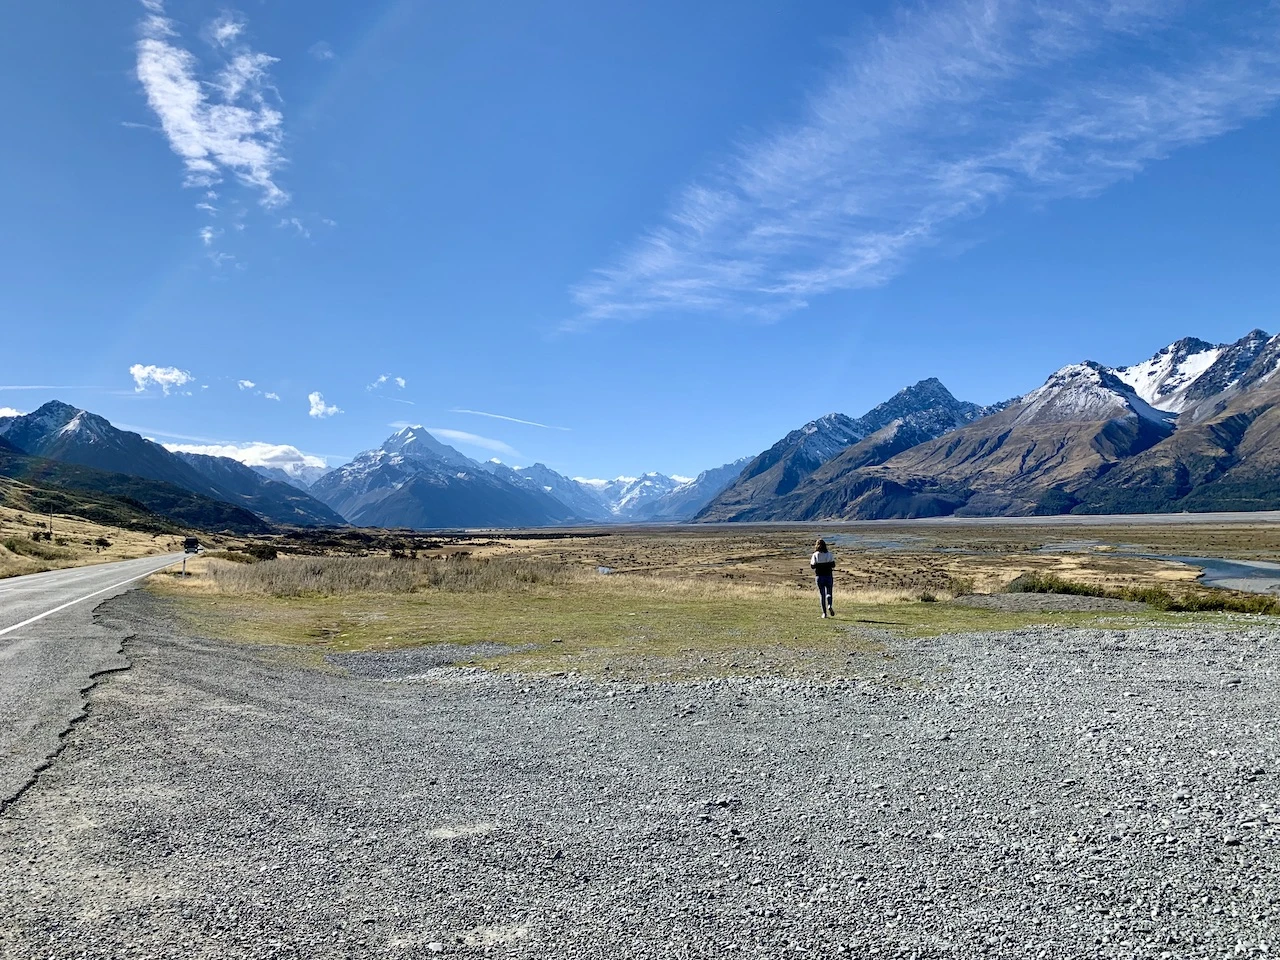 The Road to Mt Cook View